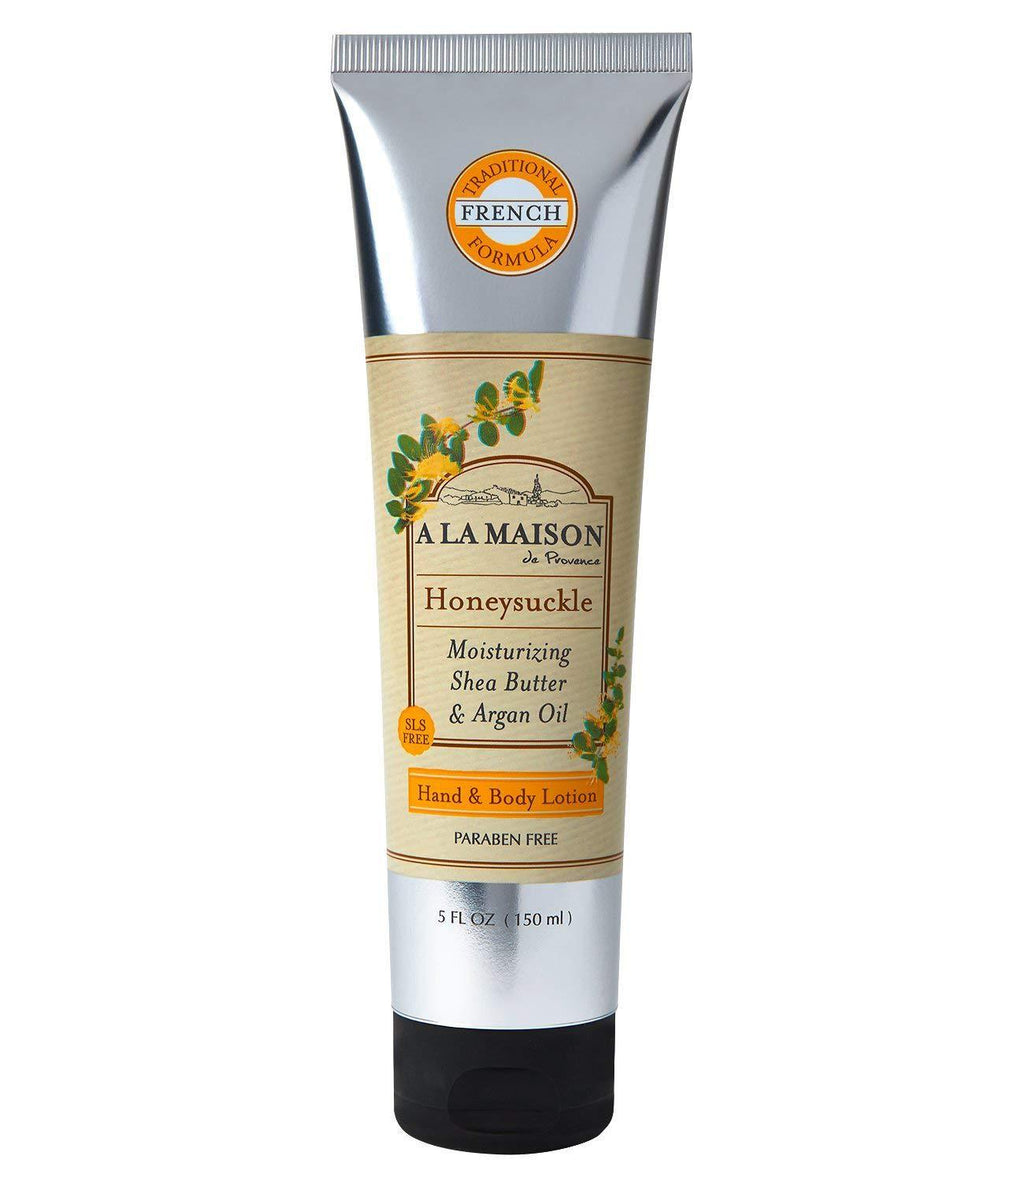 A La Maison De Provence Hand and Body Lotion | Natural Moisturizing Lotion with Argan Oil and Shea Butter | Moisturizer for Dry Skin | Paraben and Phthalates Free | Honeysuckle Scent 8 Oz (1 Pack) 1 Pack - BeesActive Australia